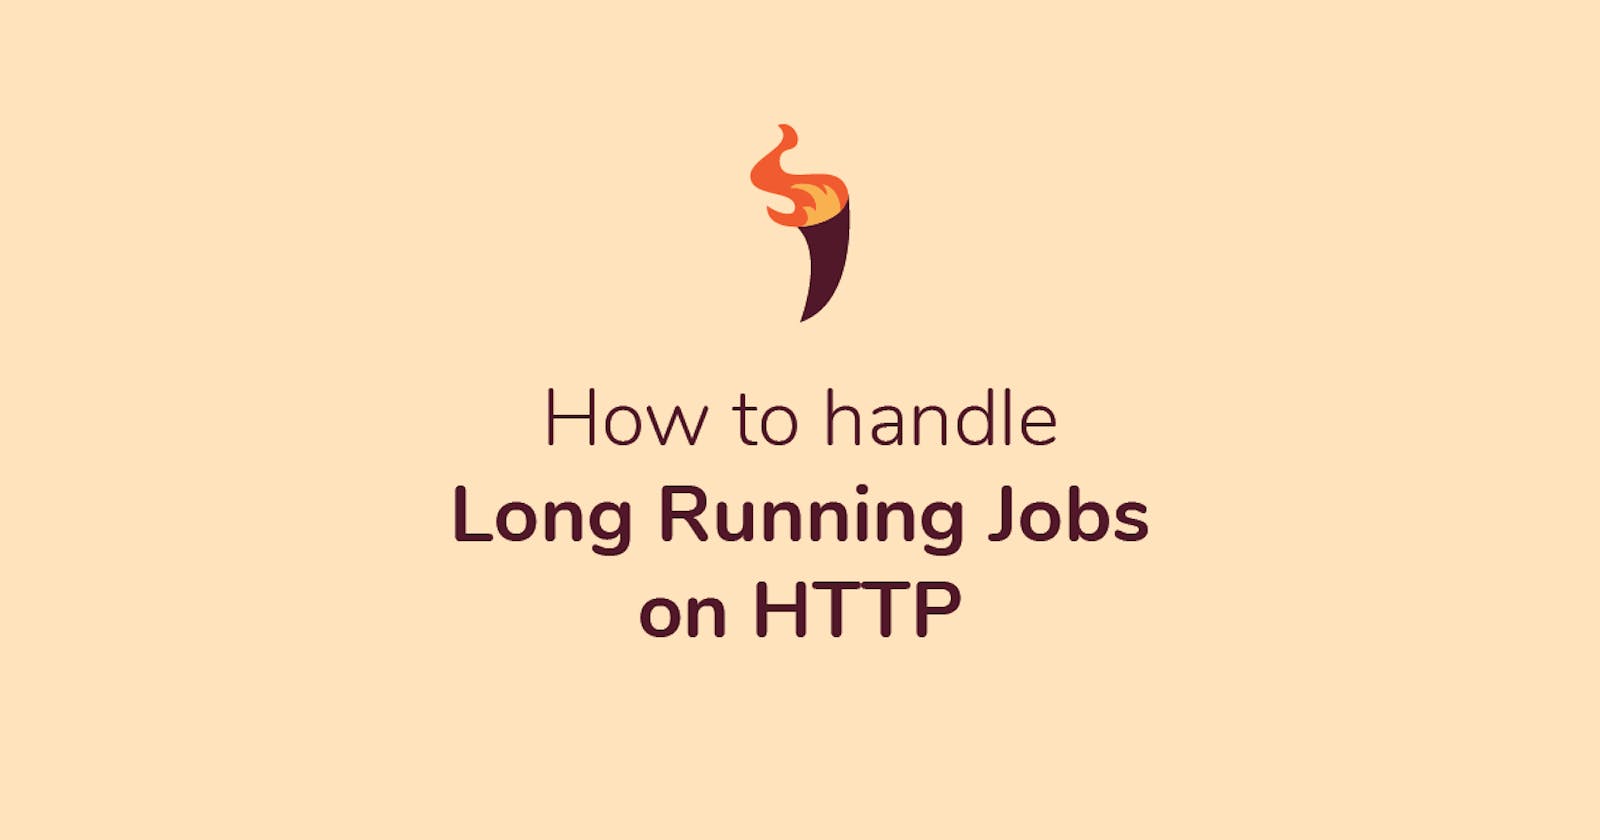 How to Handle Long Running Jobs on HTTP